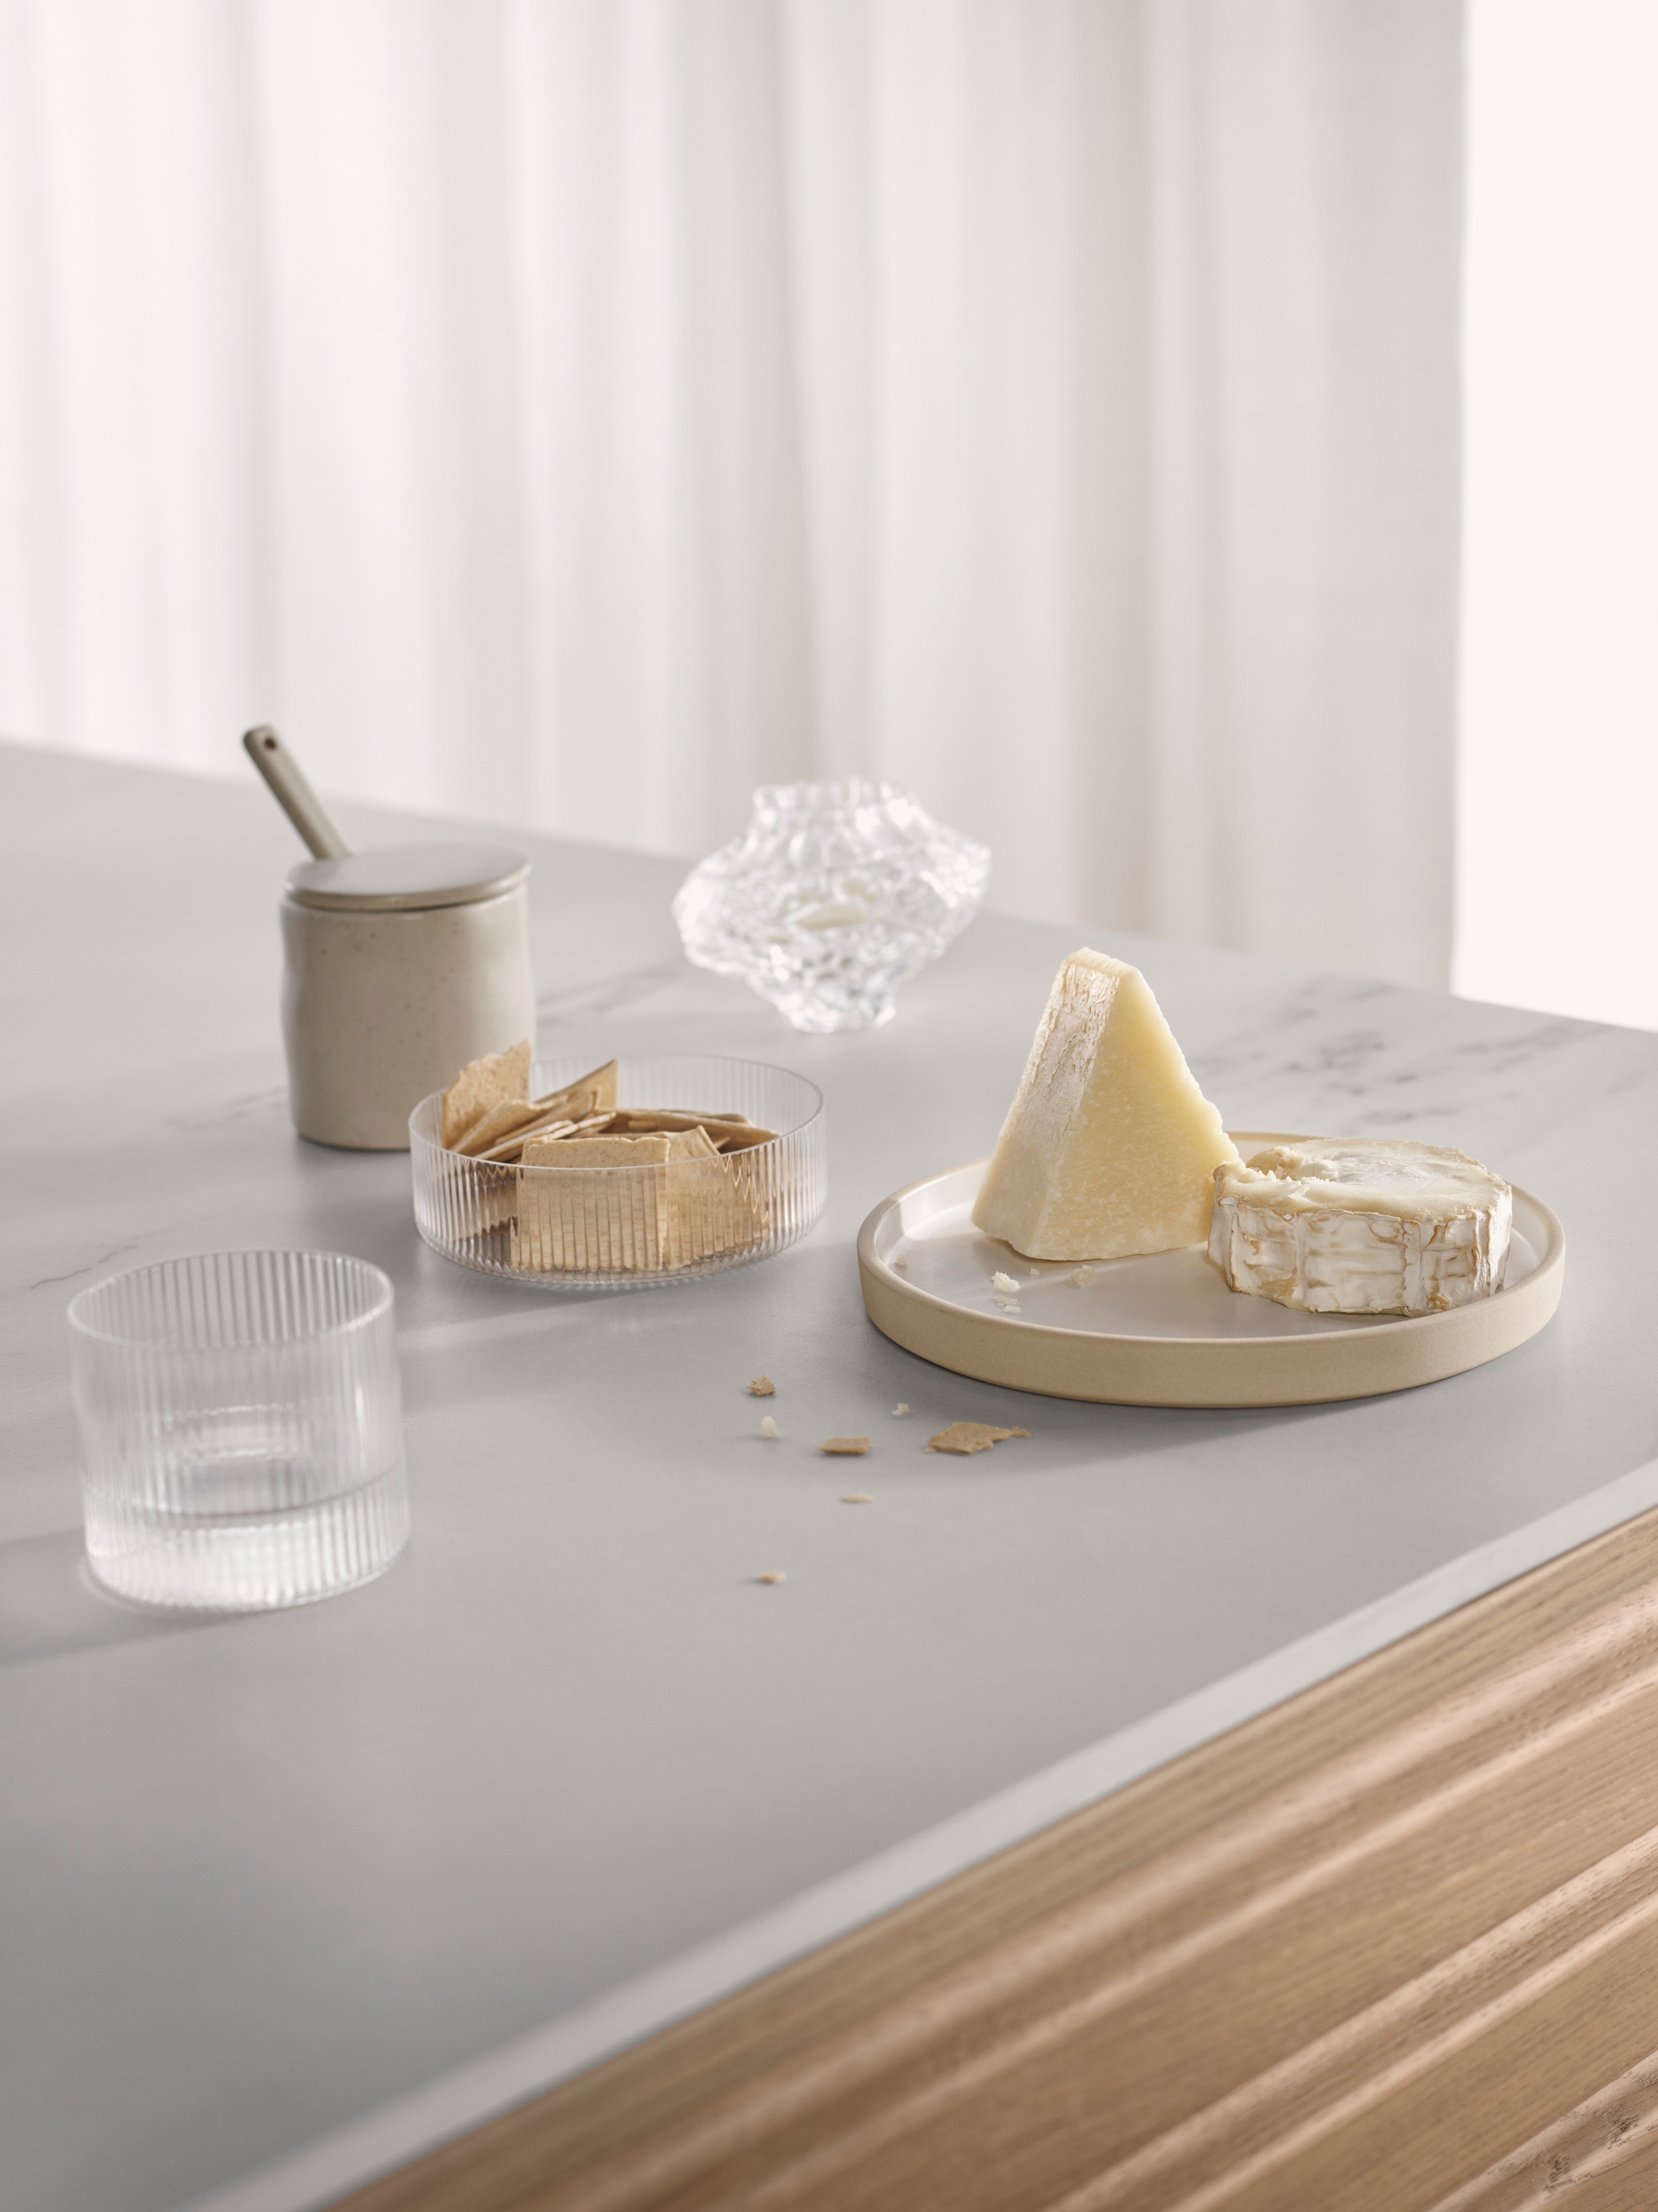 Epoq - kitchen - cheese and plates on a countertop